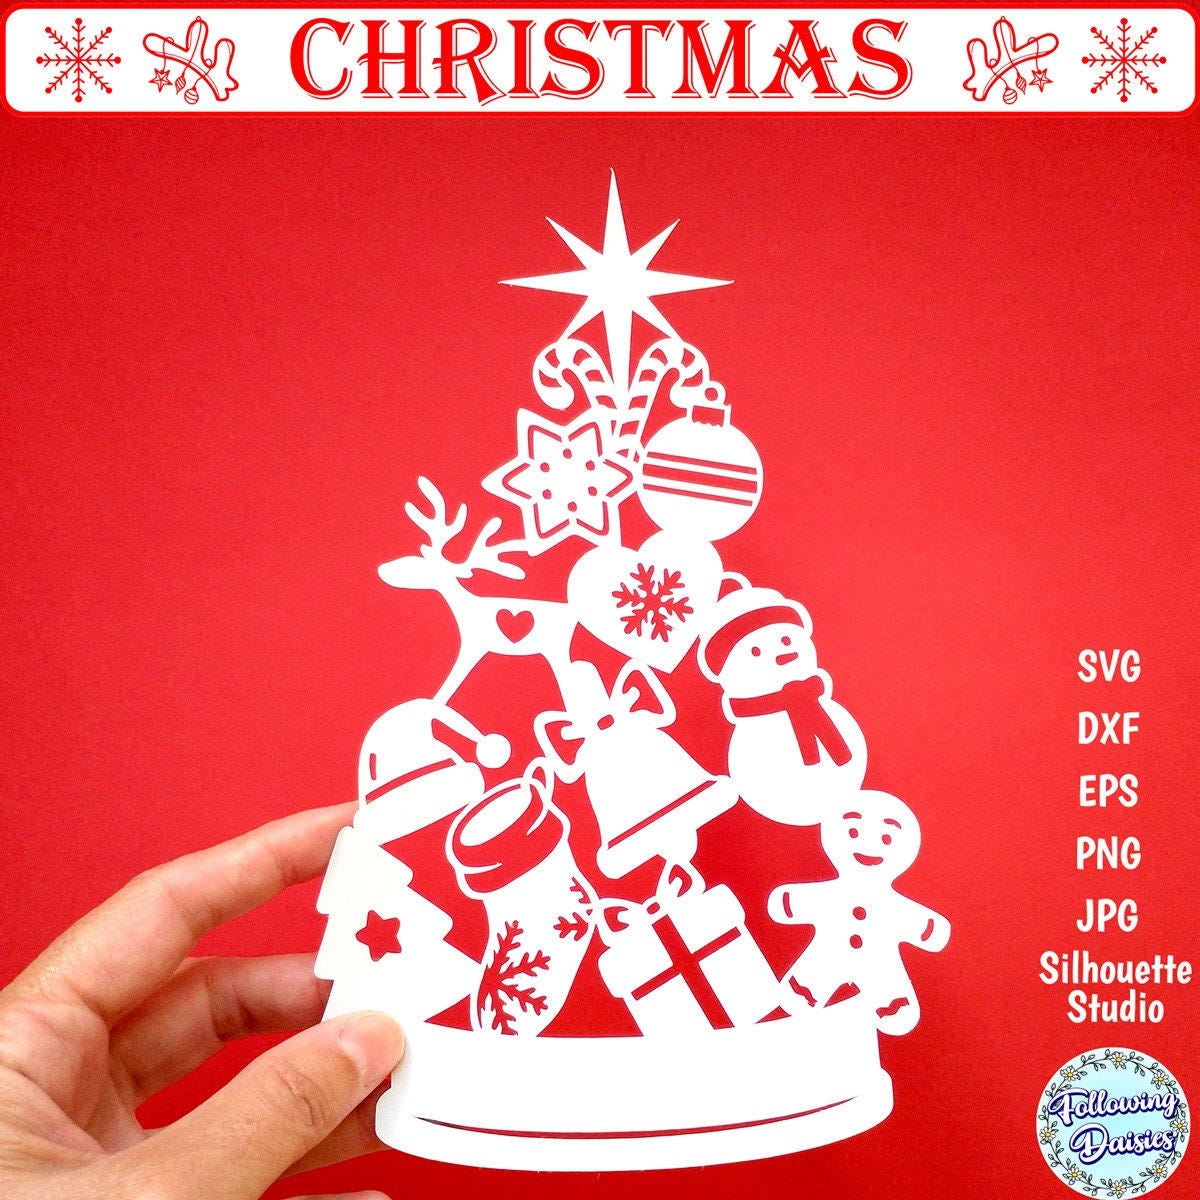 CHRISTMAS TREE SVG, Christmas decorations, Merry Christmas, Christmas ornamets, Christmas cut files, Svg files for Cricut and Silhouette